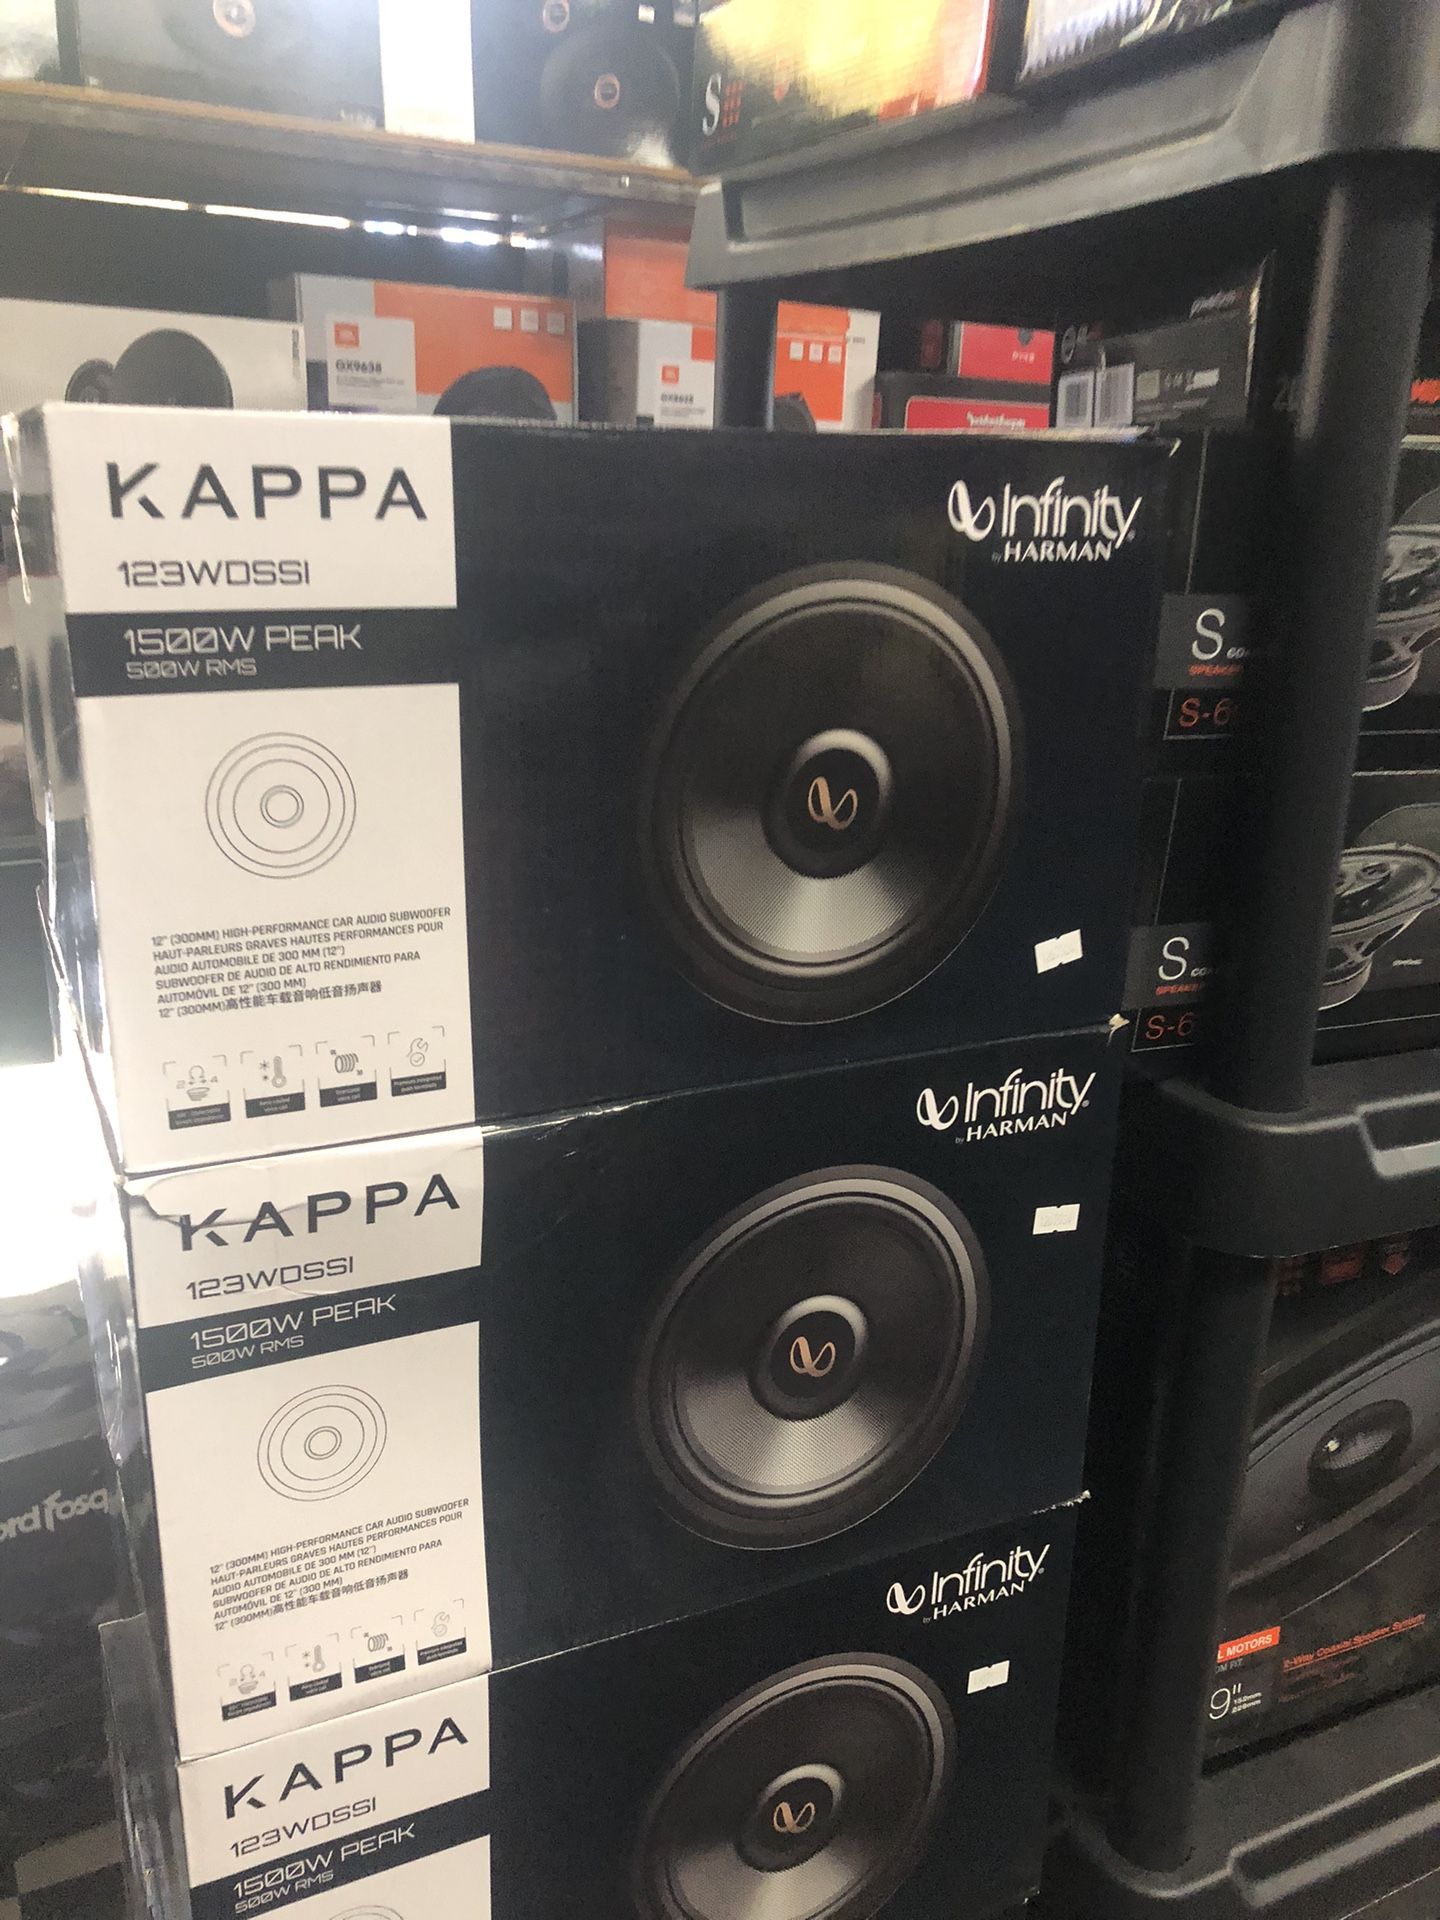 Infinity Kappa 12 Subwoofer On Sale For 139.99